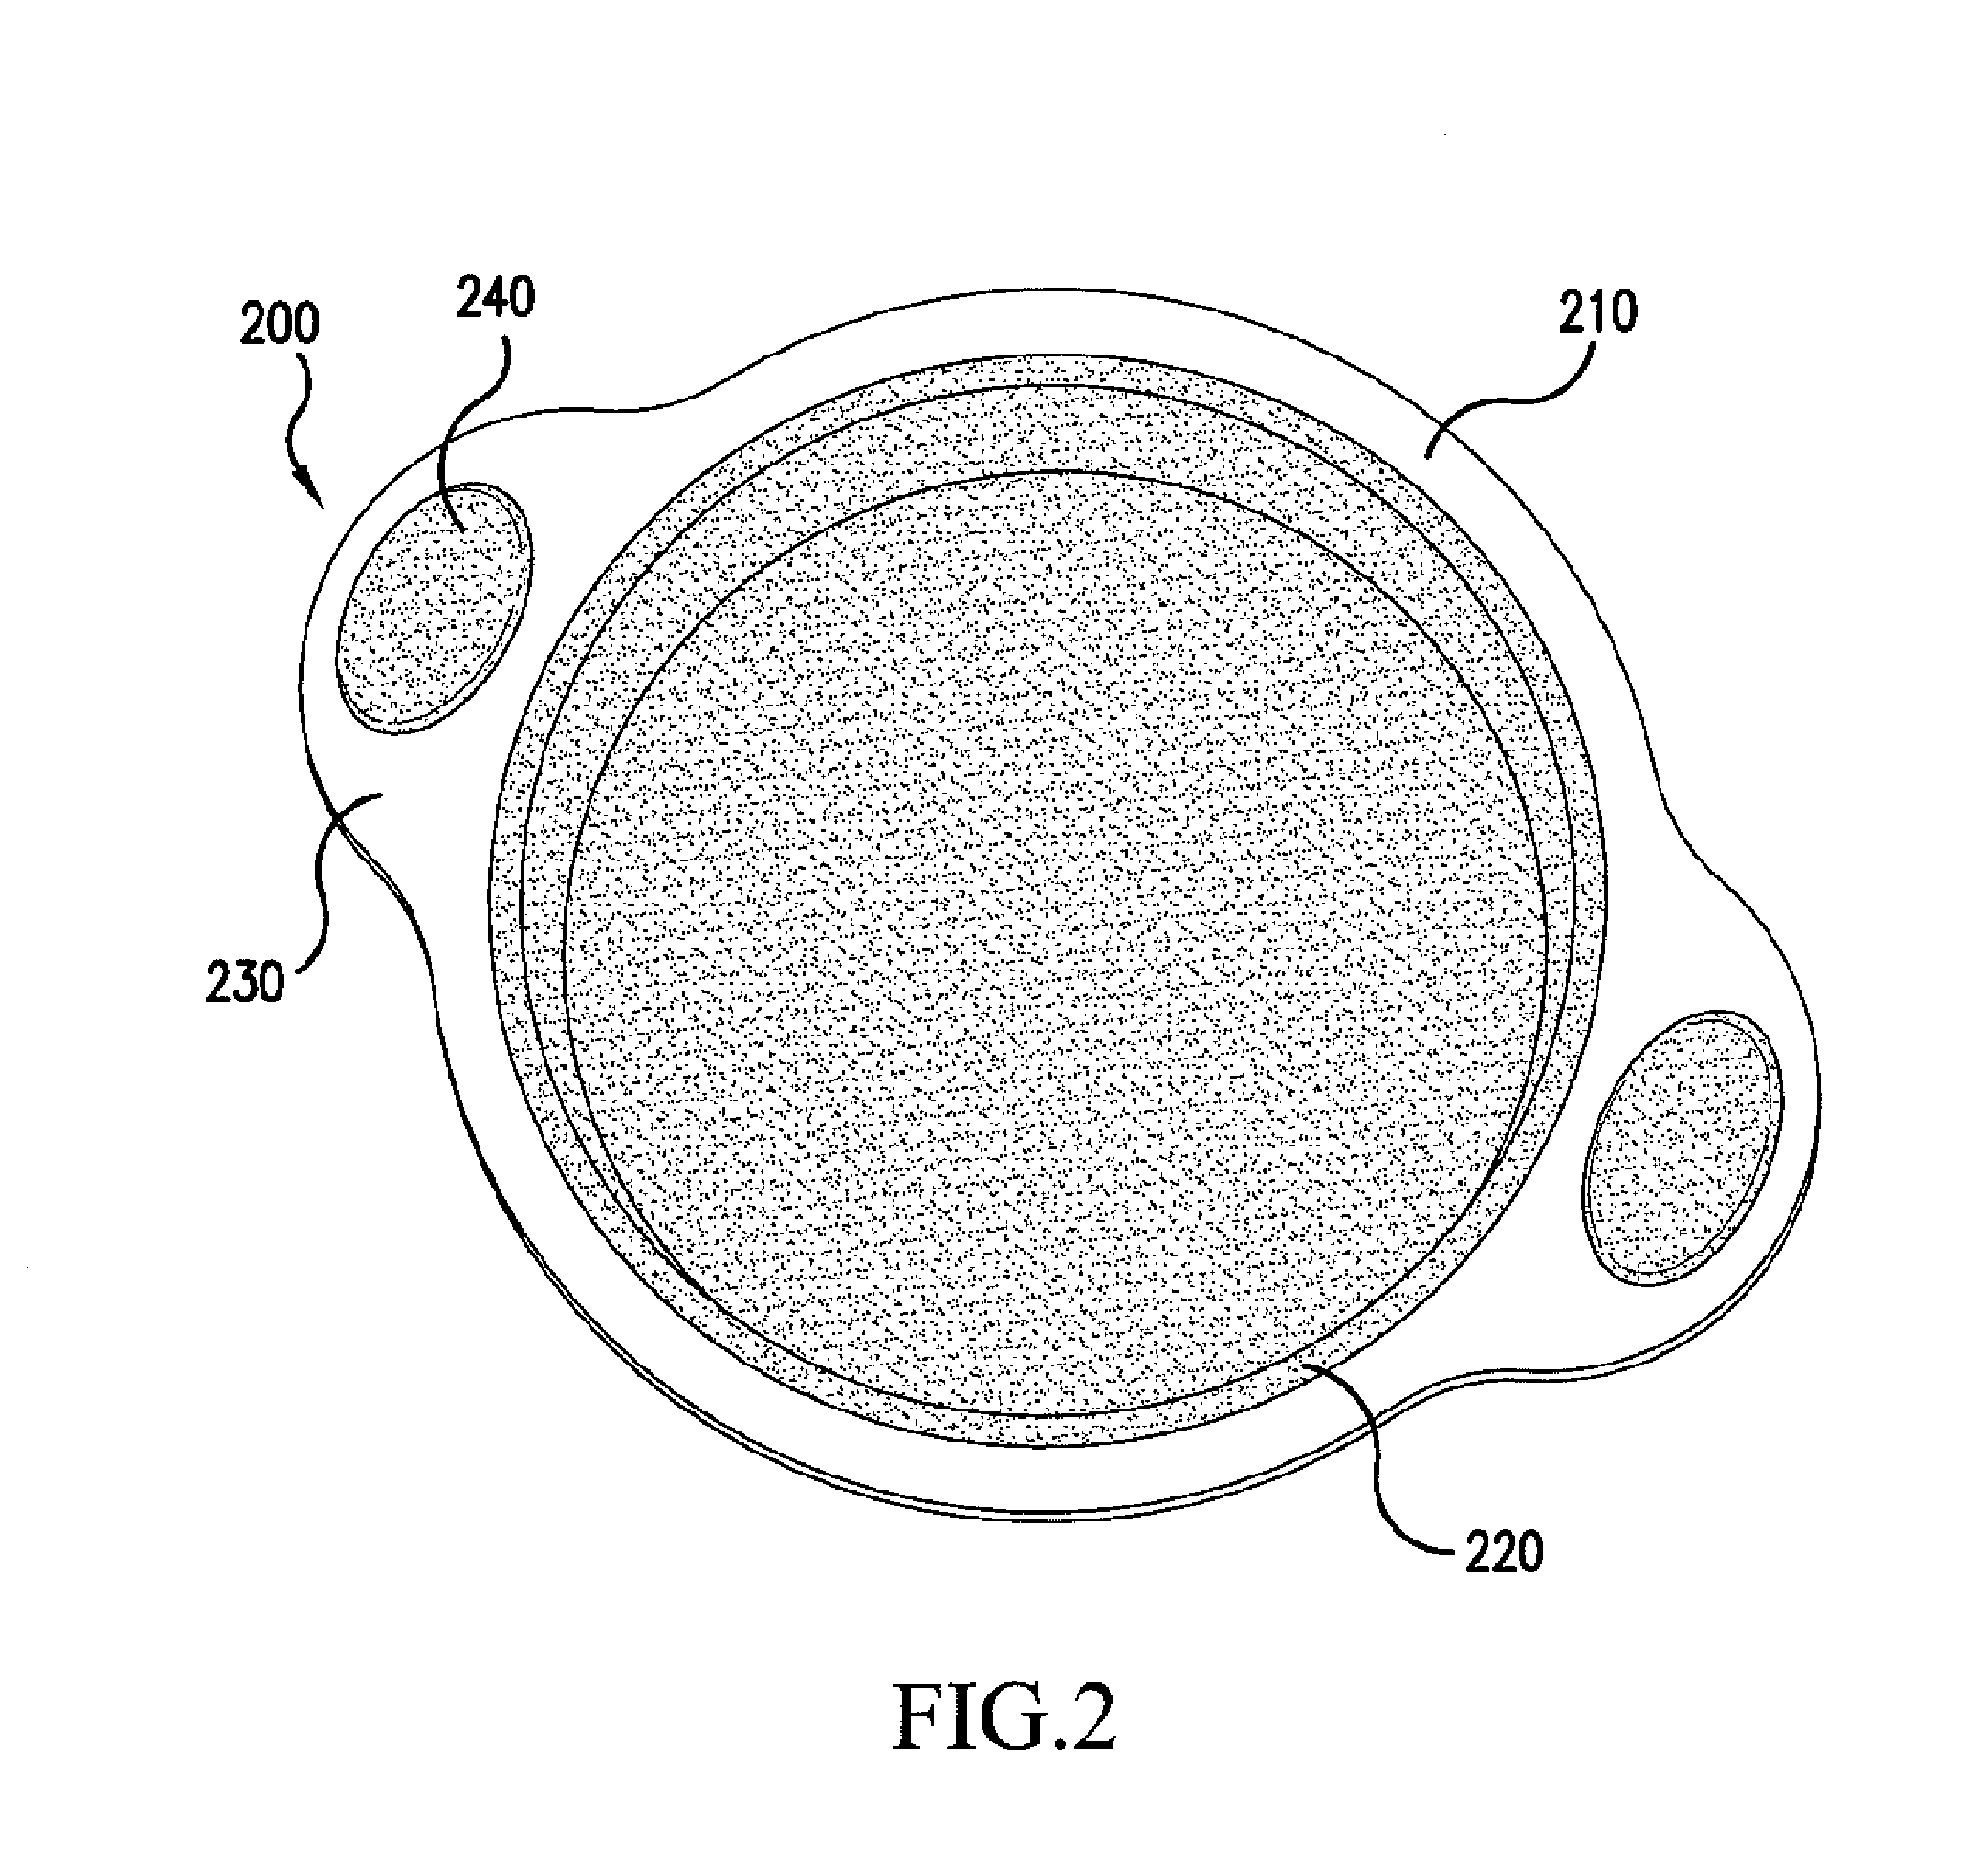 Bakeware having a flexible member and method of manufacturing same